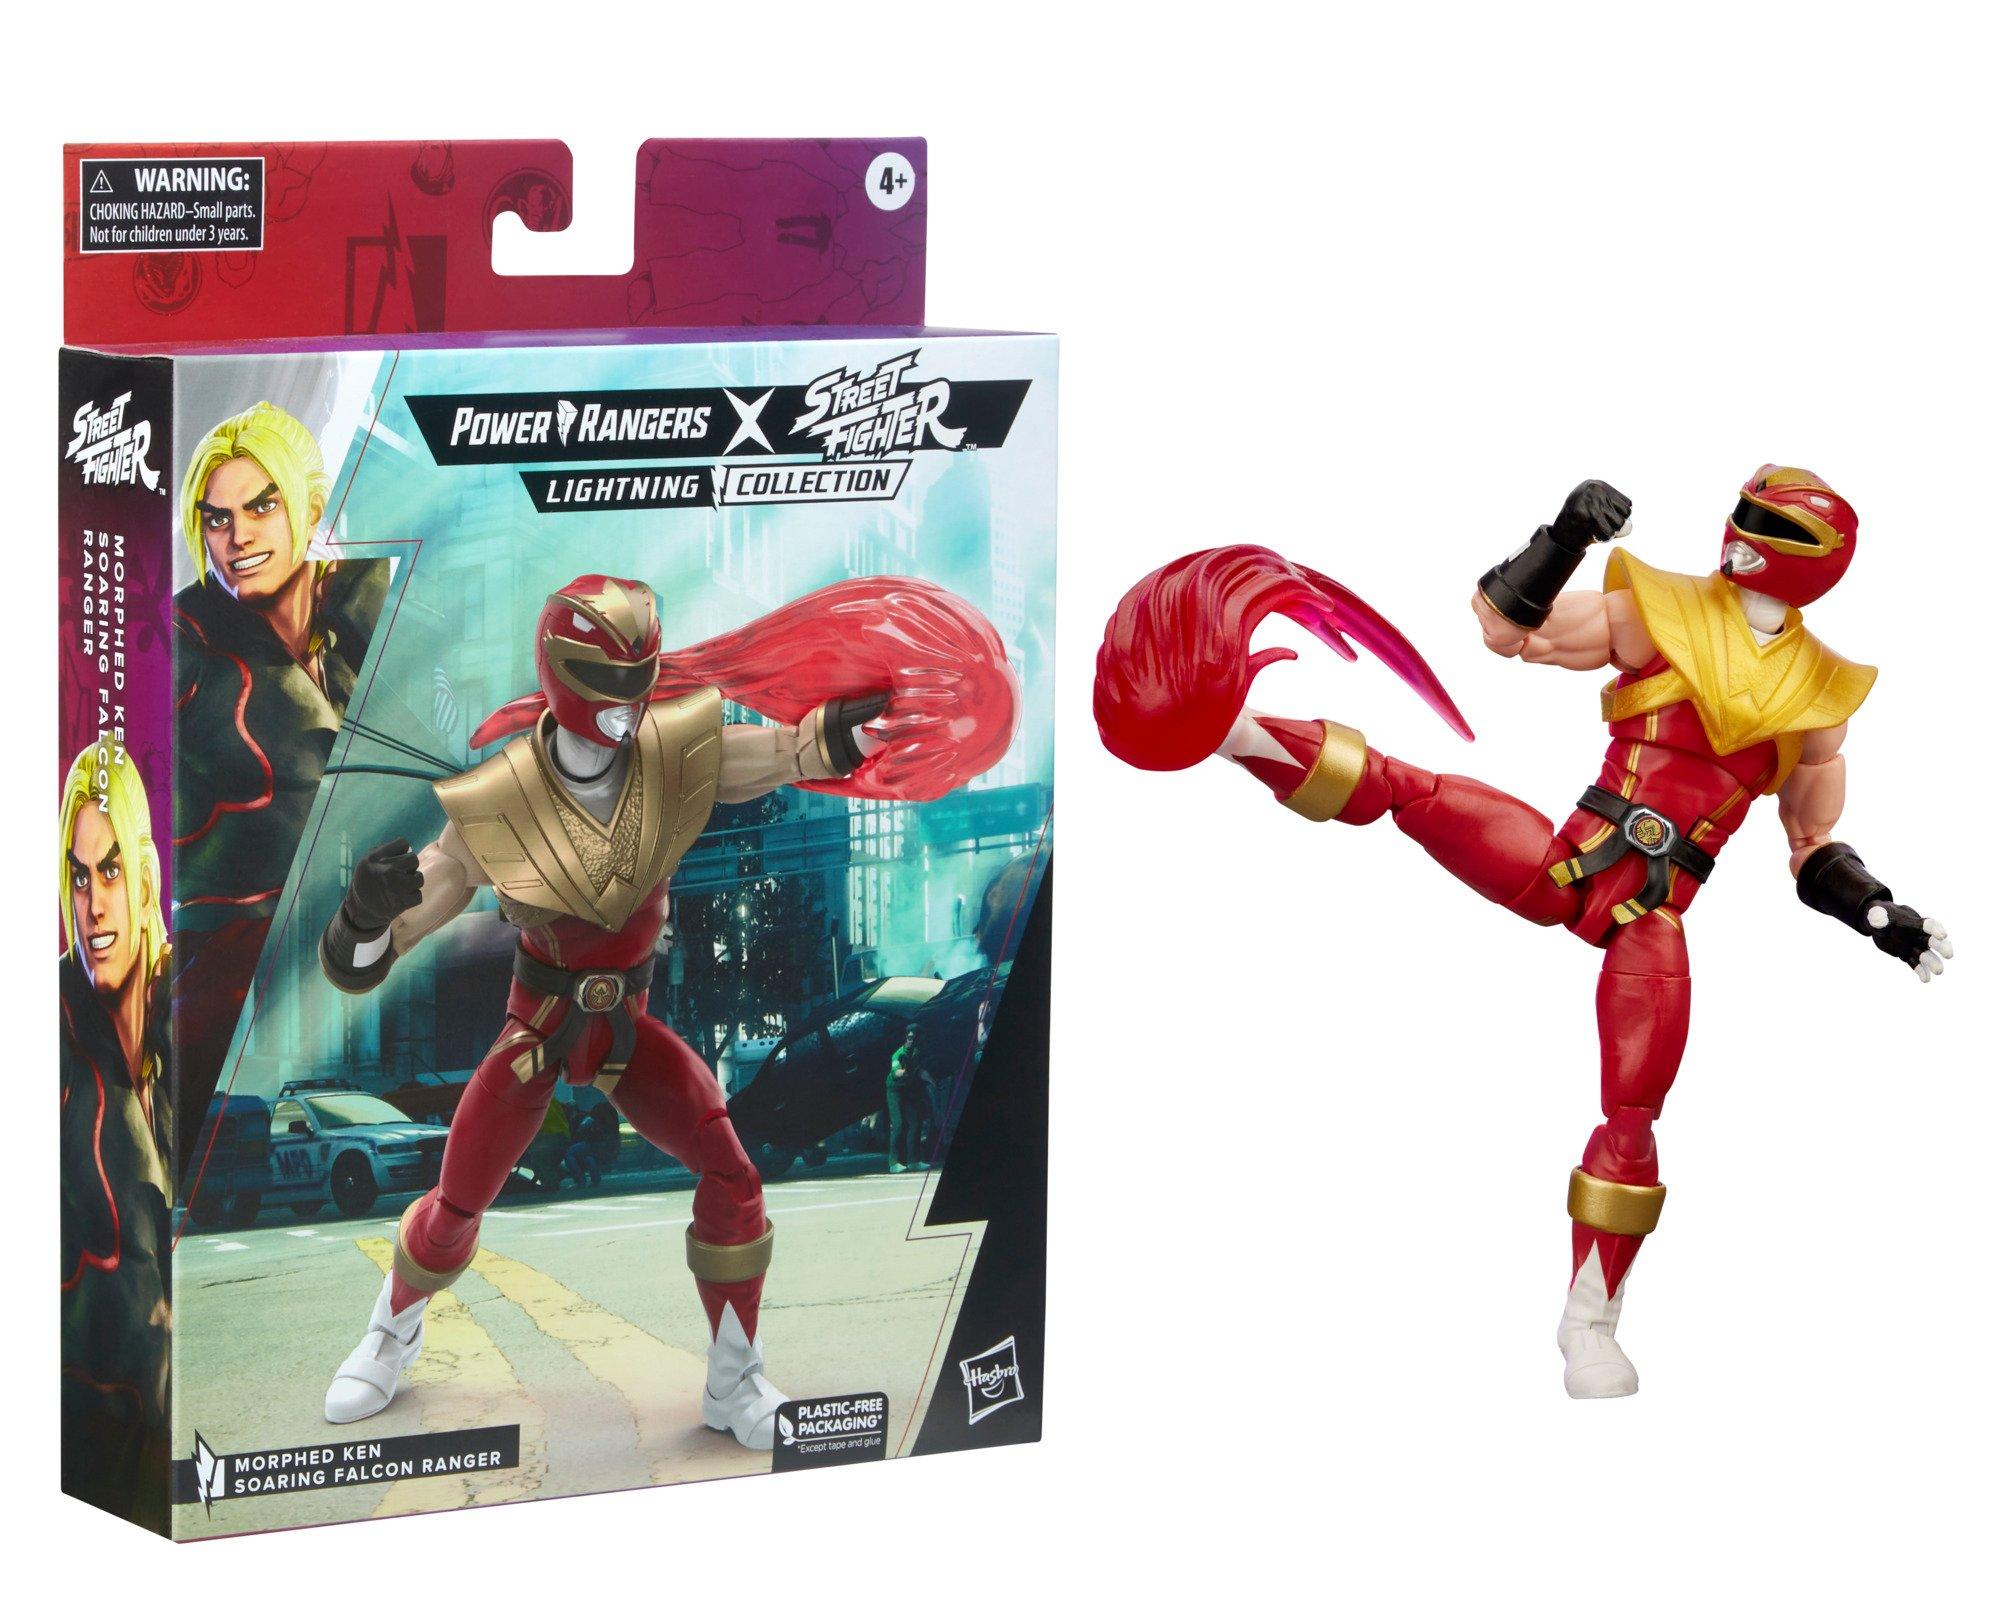 Hasbro Lightning Collection Mighty Morphin Power Rangers x Street Fighter  Collab Ken Soaring Falcon Ranger 6-in Action Figure